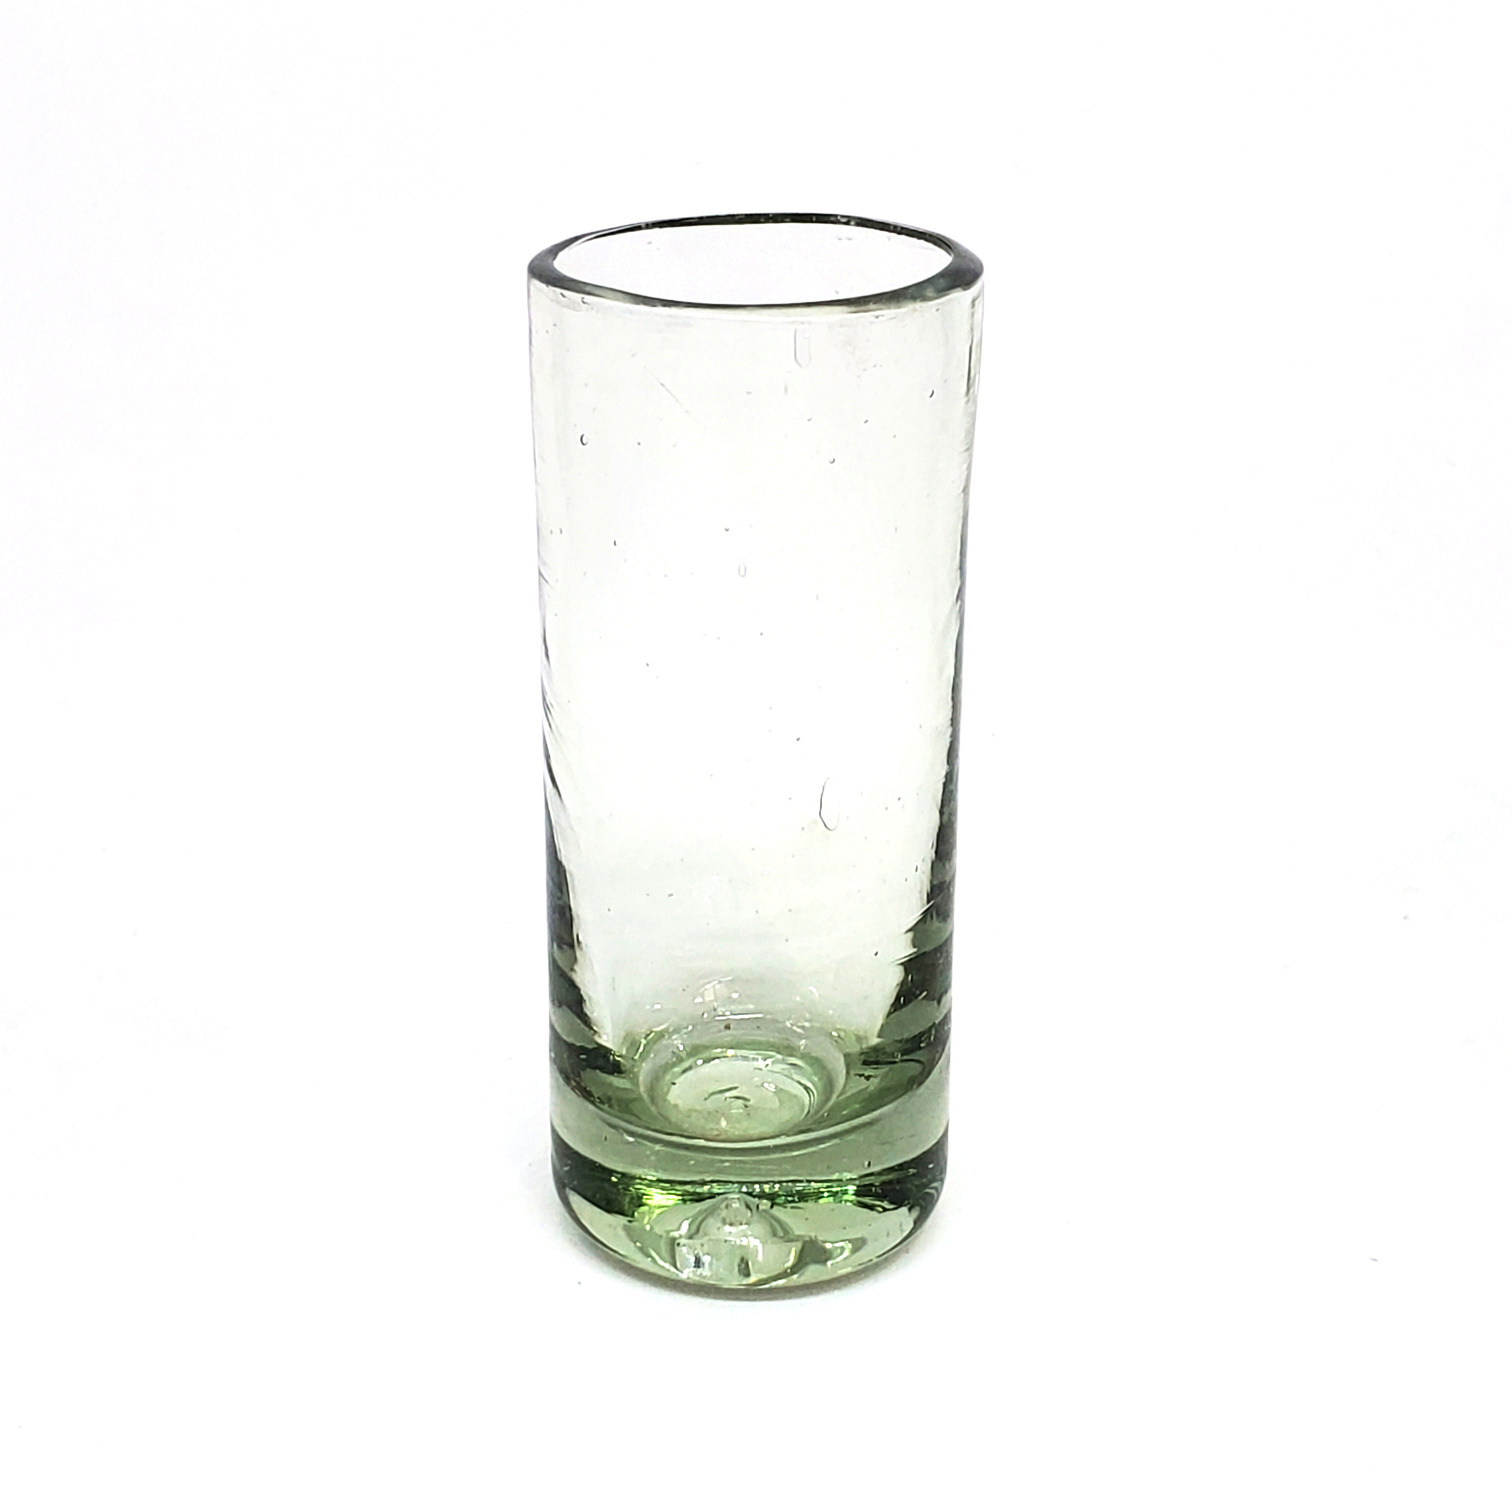 Wholesale Colored Glassware / Clear 2 oz Tequila Shot Glasses  / Sip your favourite tequila or mezcal with these iconic clear handcrafted shot glasses.